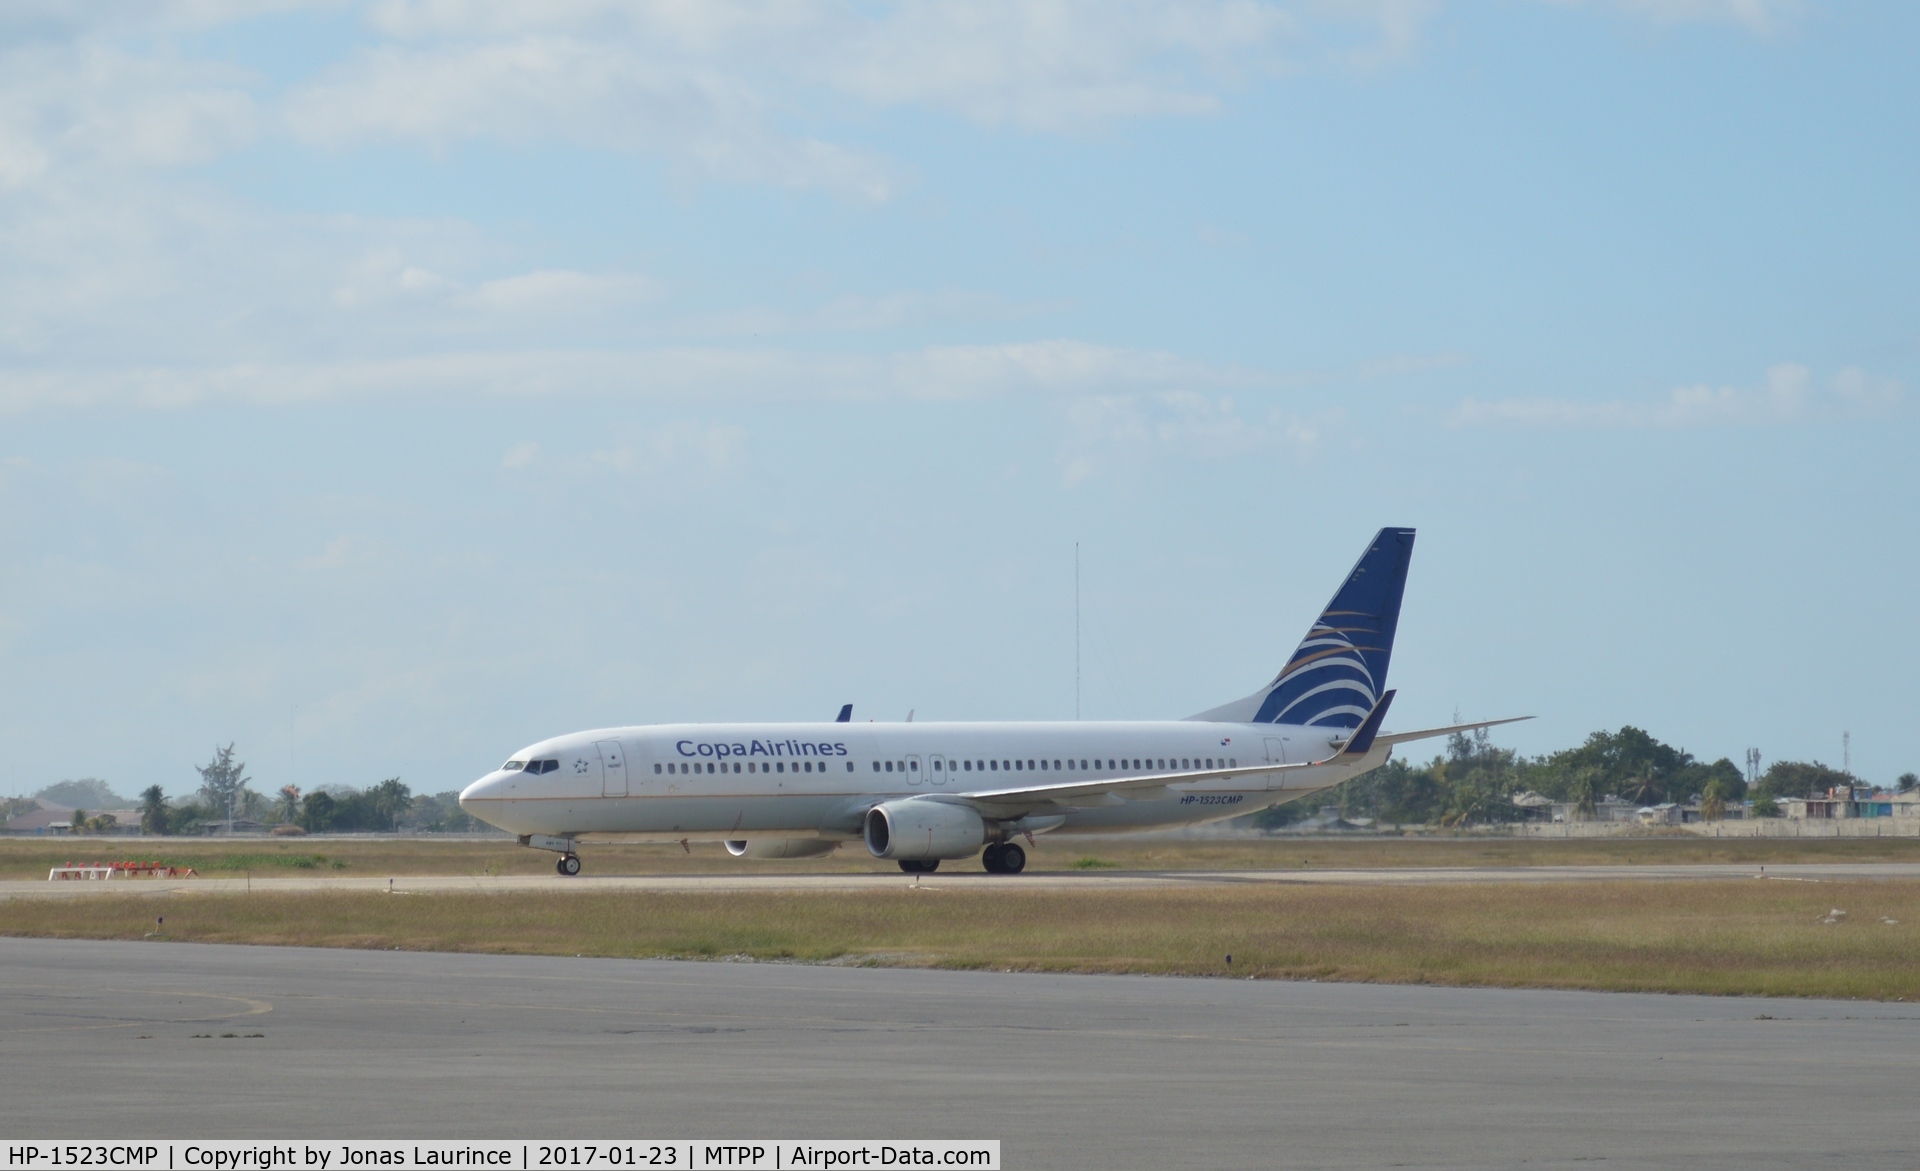 HP-1523CMP, 2008 Boeing 737-8Q8 C/N 35274, Aircraft Copa Airlines at the PAP